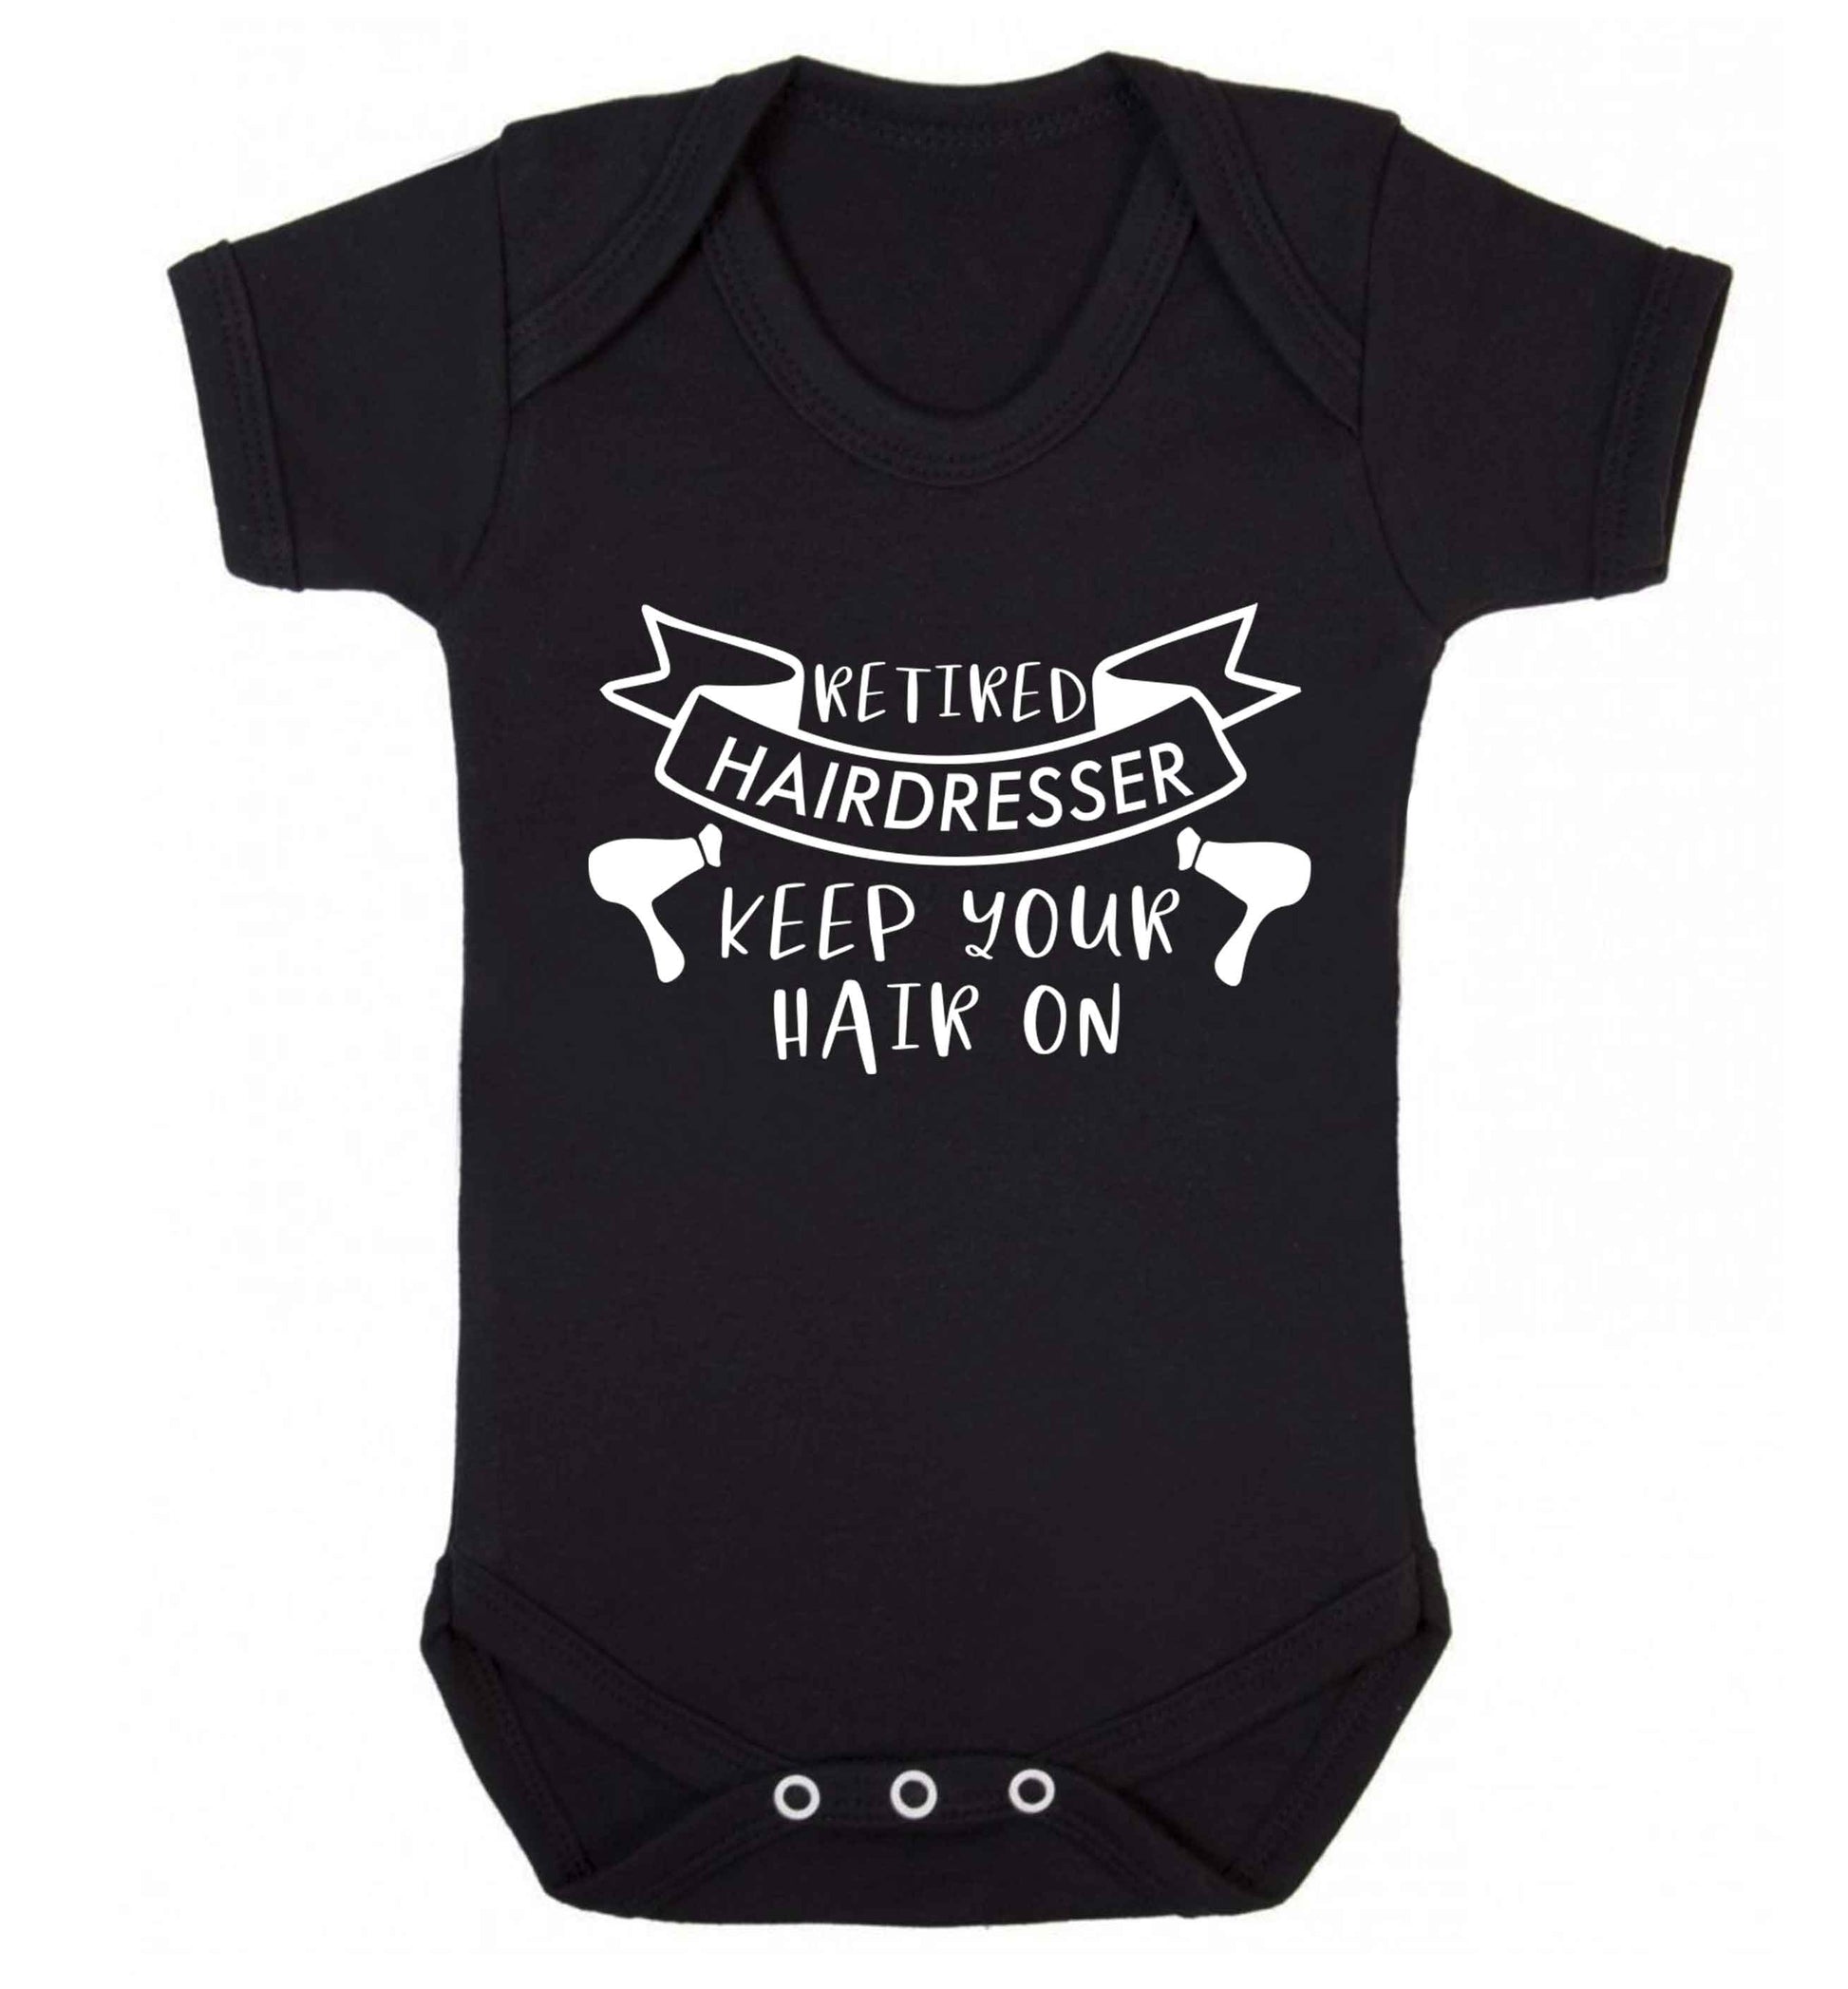 Retired hairdresser keep your hair on Baby Vest black 18-24 months